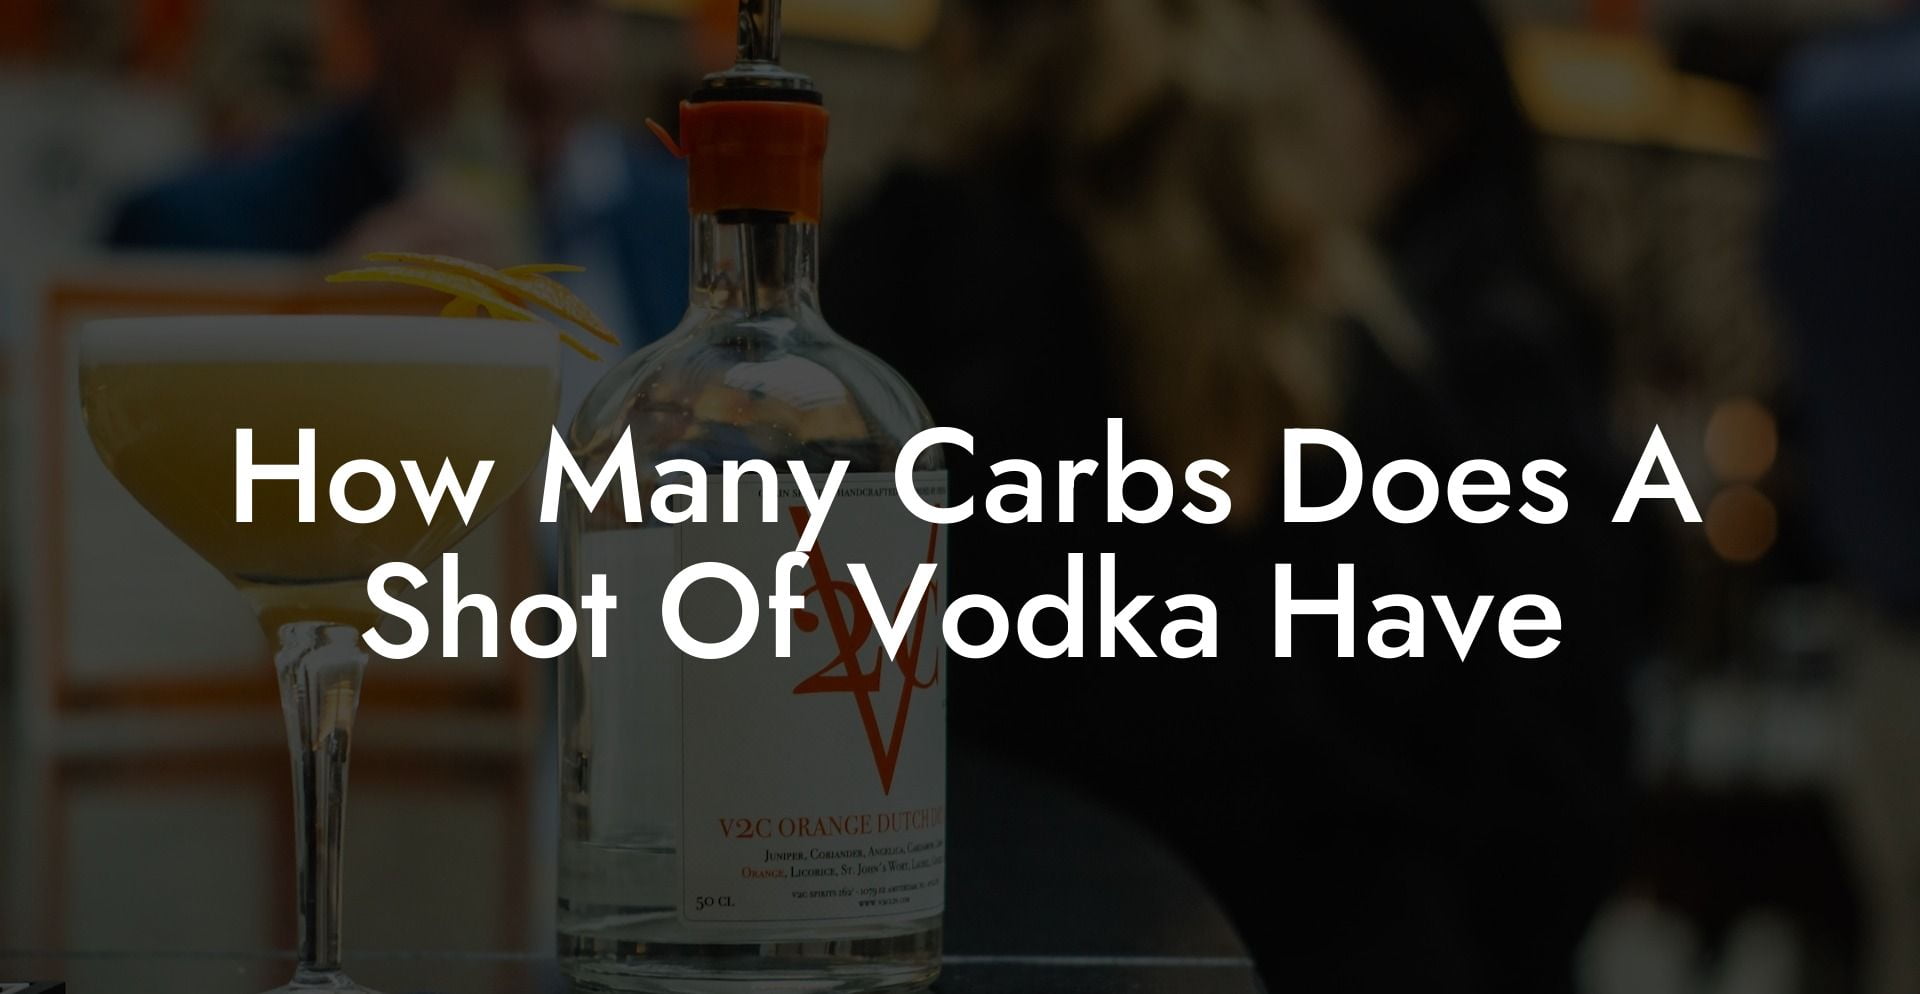 How Many Carbs Does A Shot Of Vodka Have